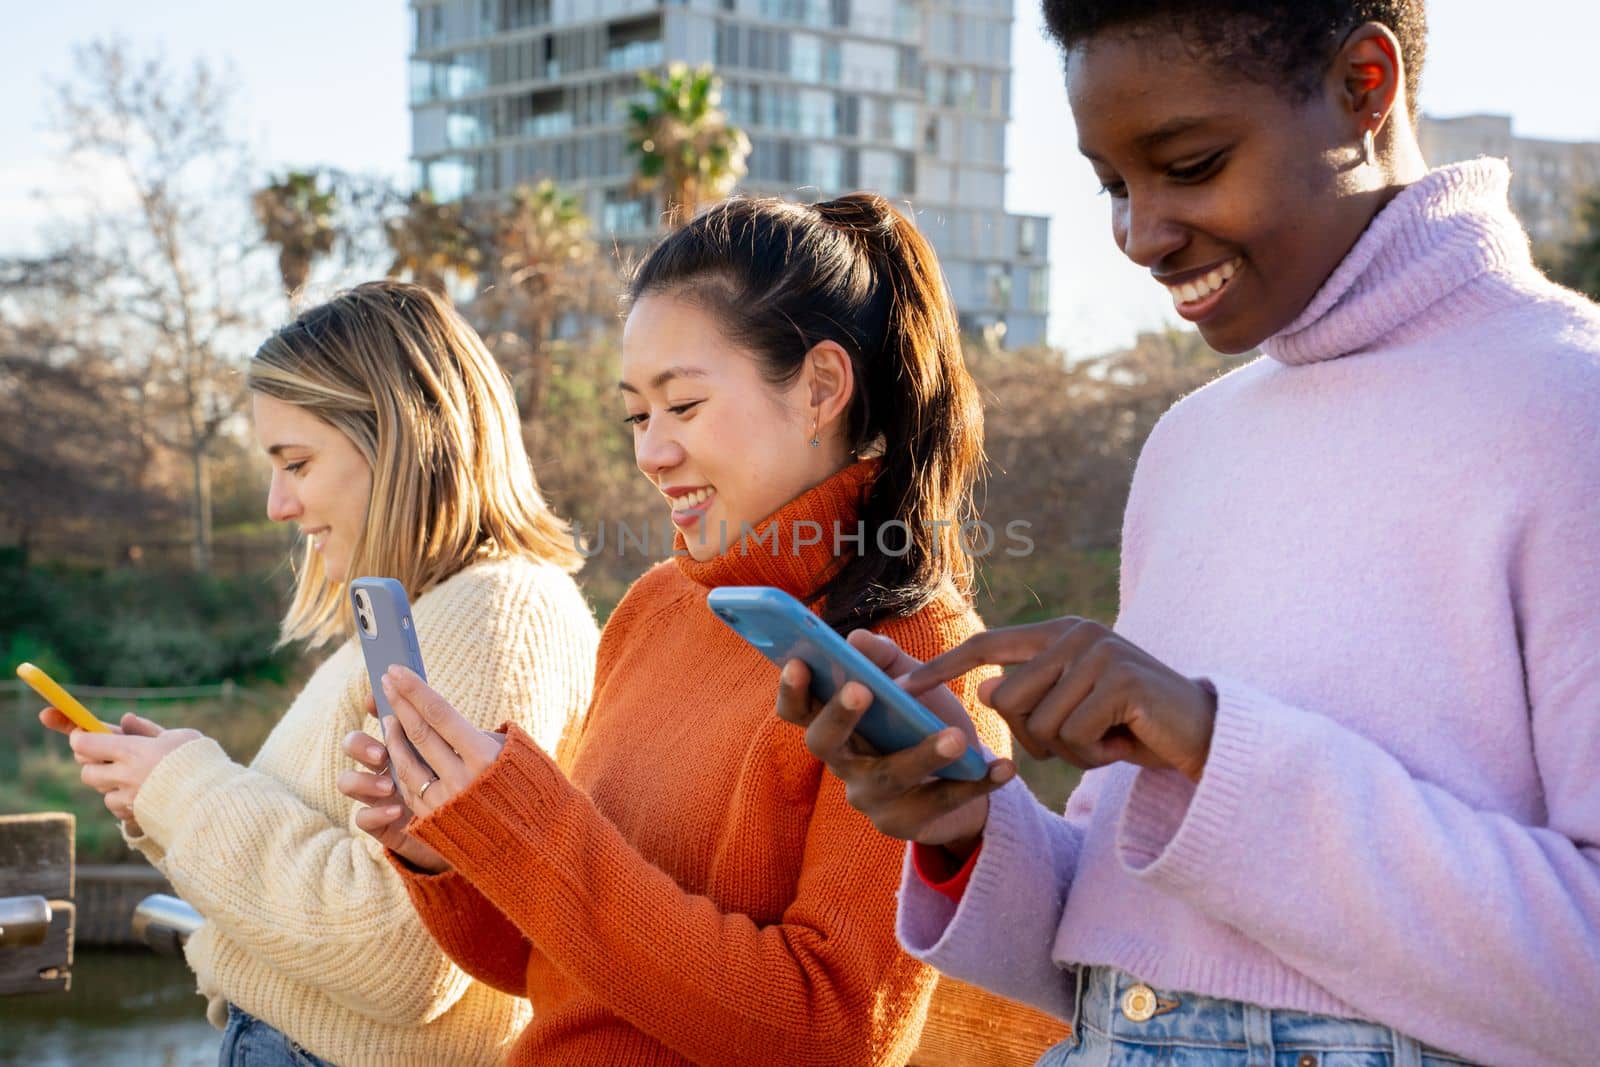 Cheerful female friends using cell phones and walking in the city. Technology addicted millennial community concept. Social Media communication generation Z. High quality photo